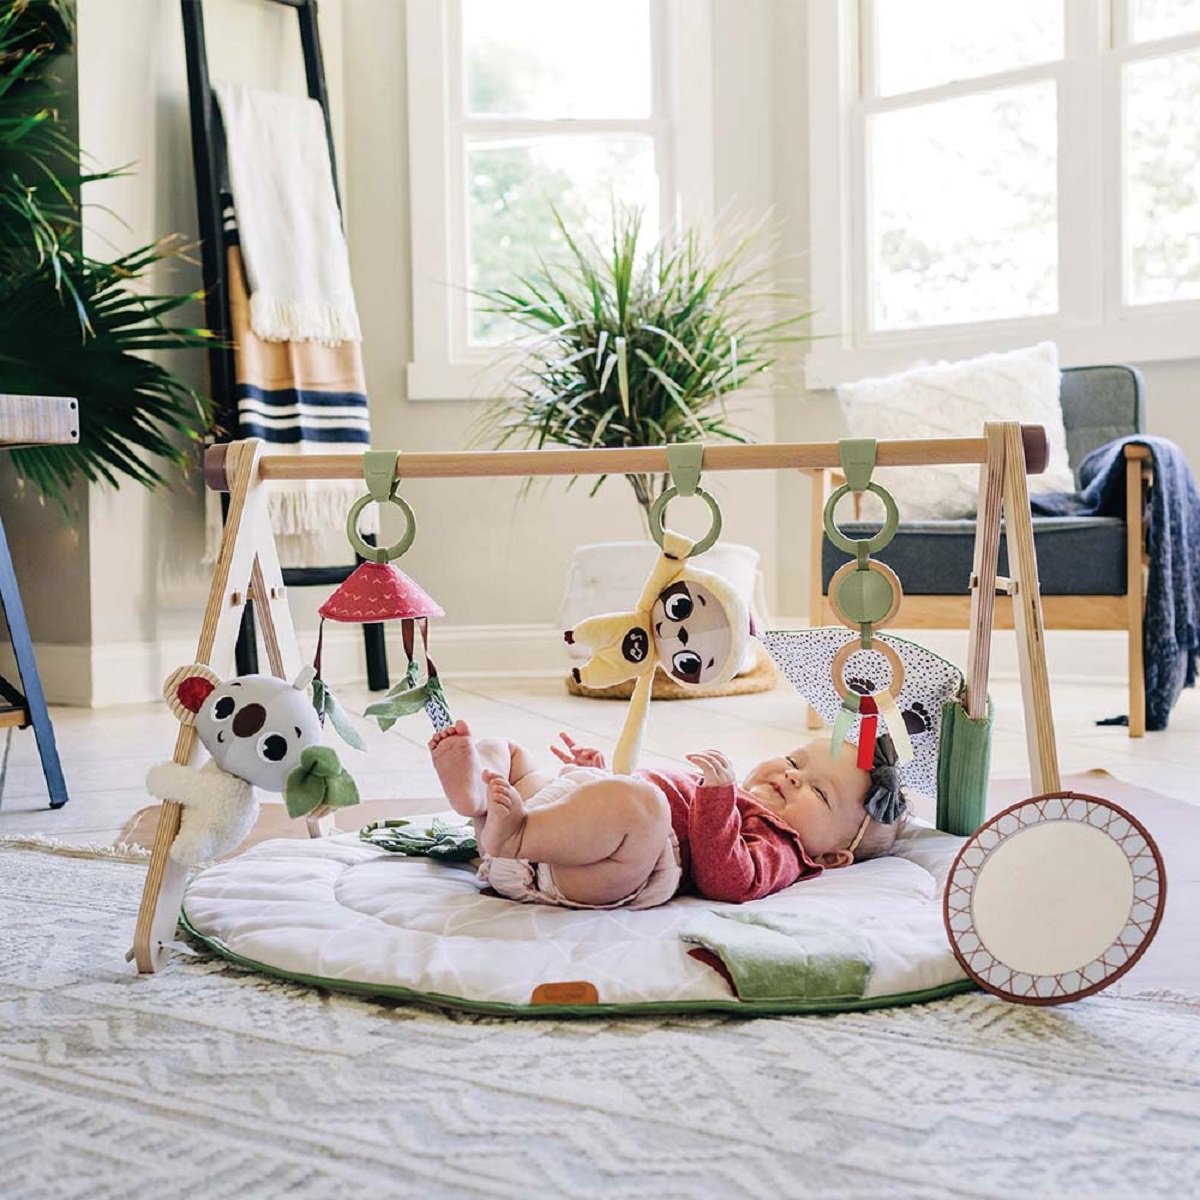 25 Top Baby Products You Need For Welcoming A New Baby